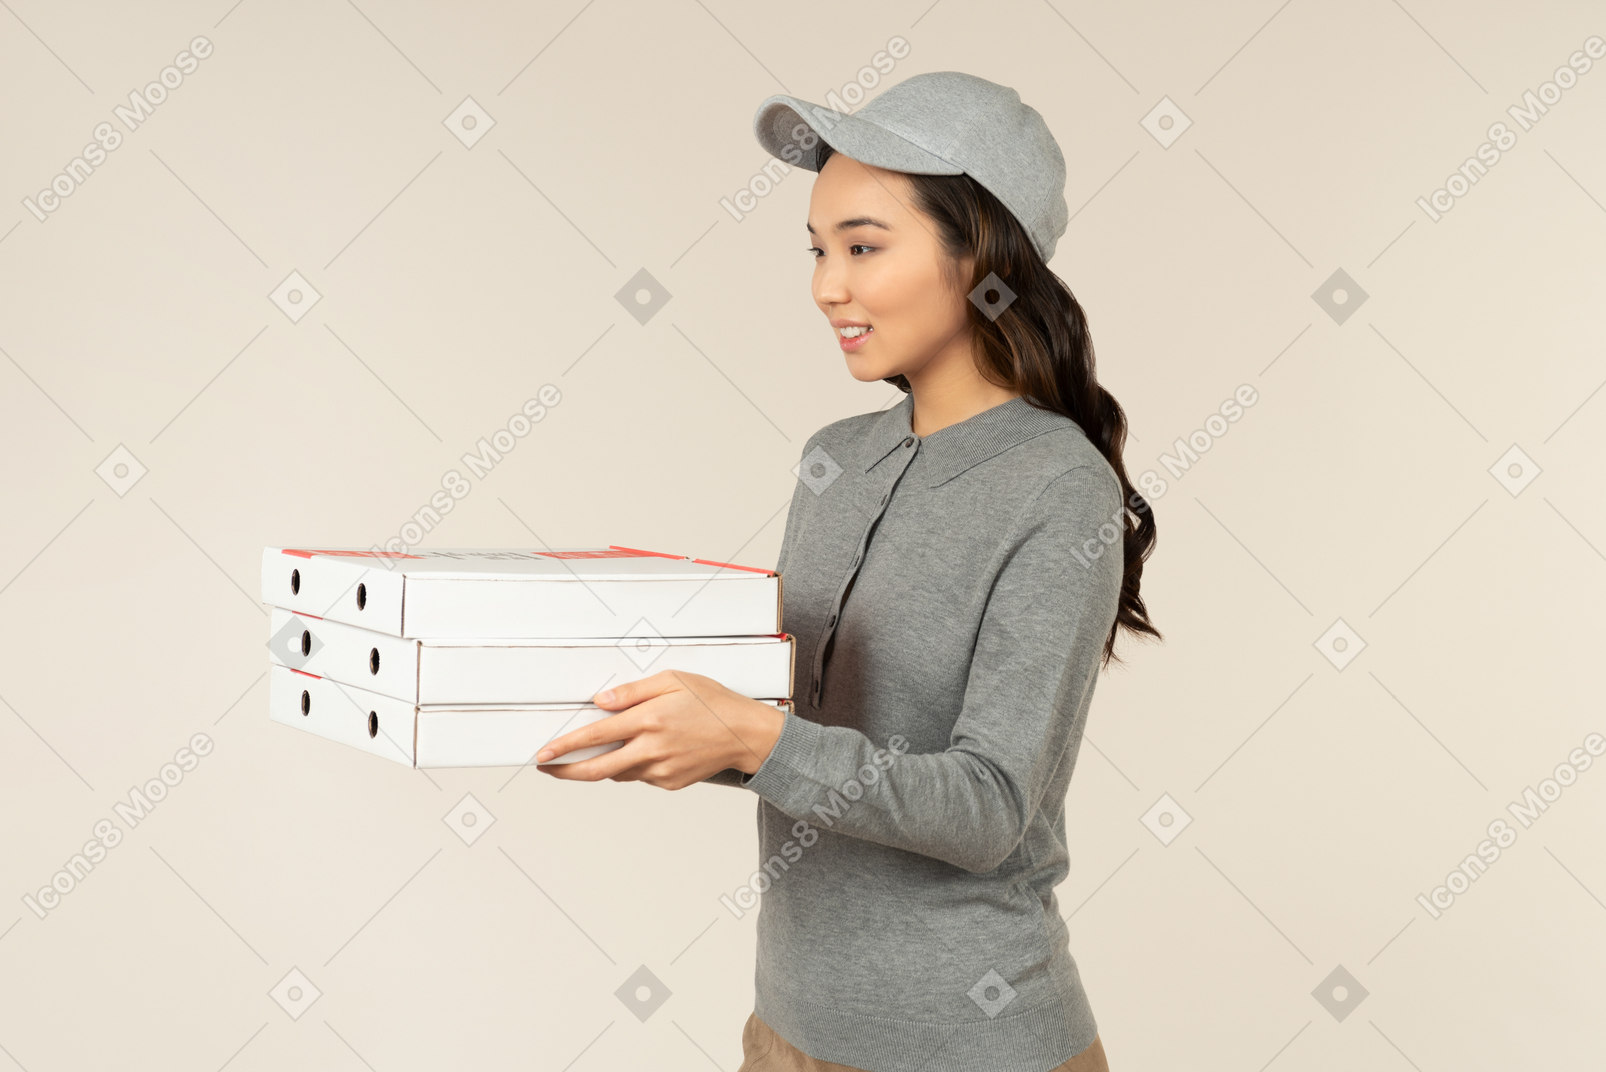 Delivering yoyur pizza right to the door